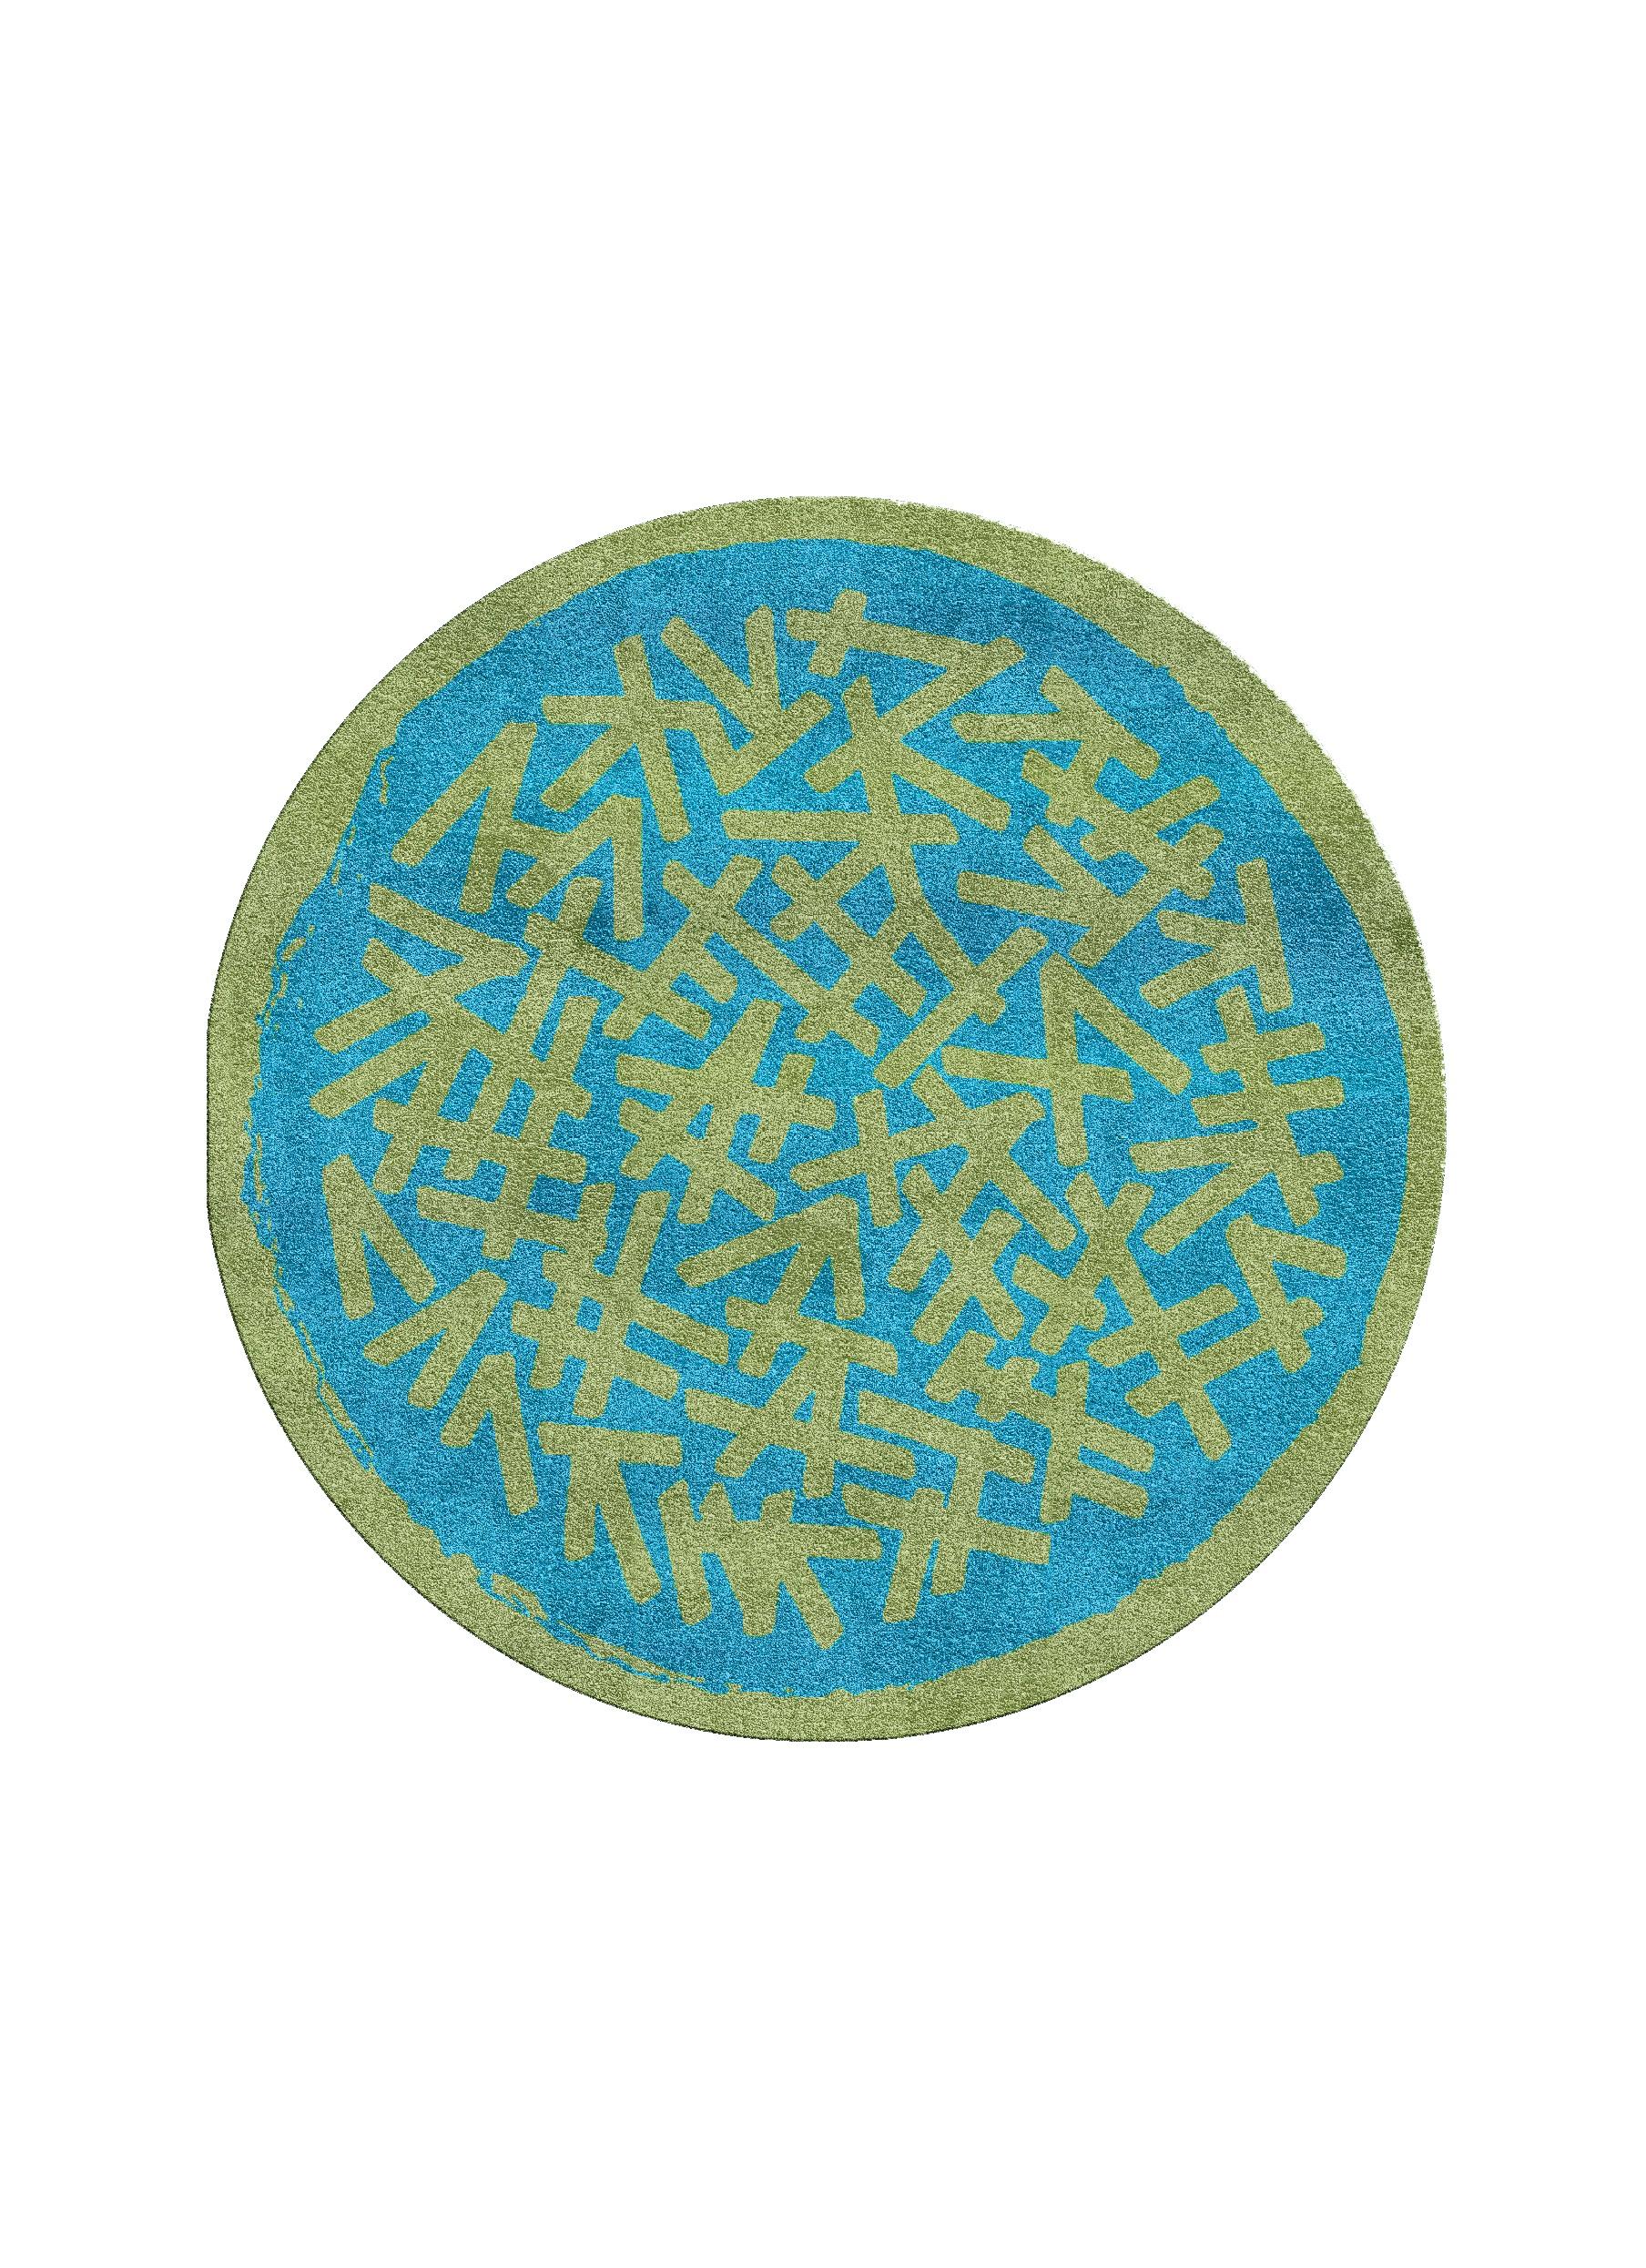 Other Circular Rug I by Raul For Sale